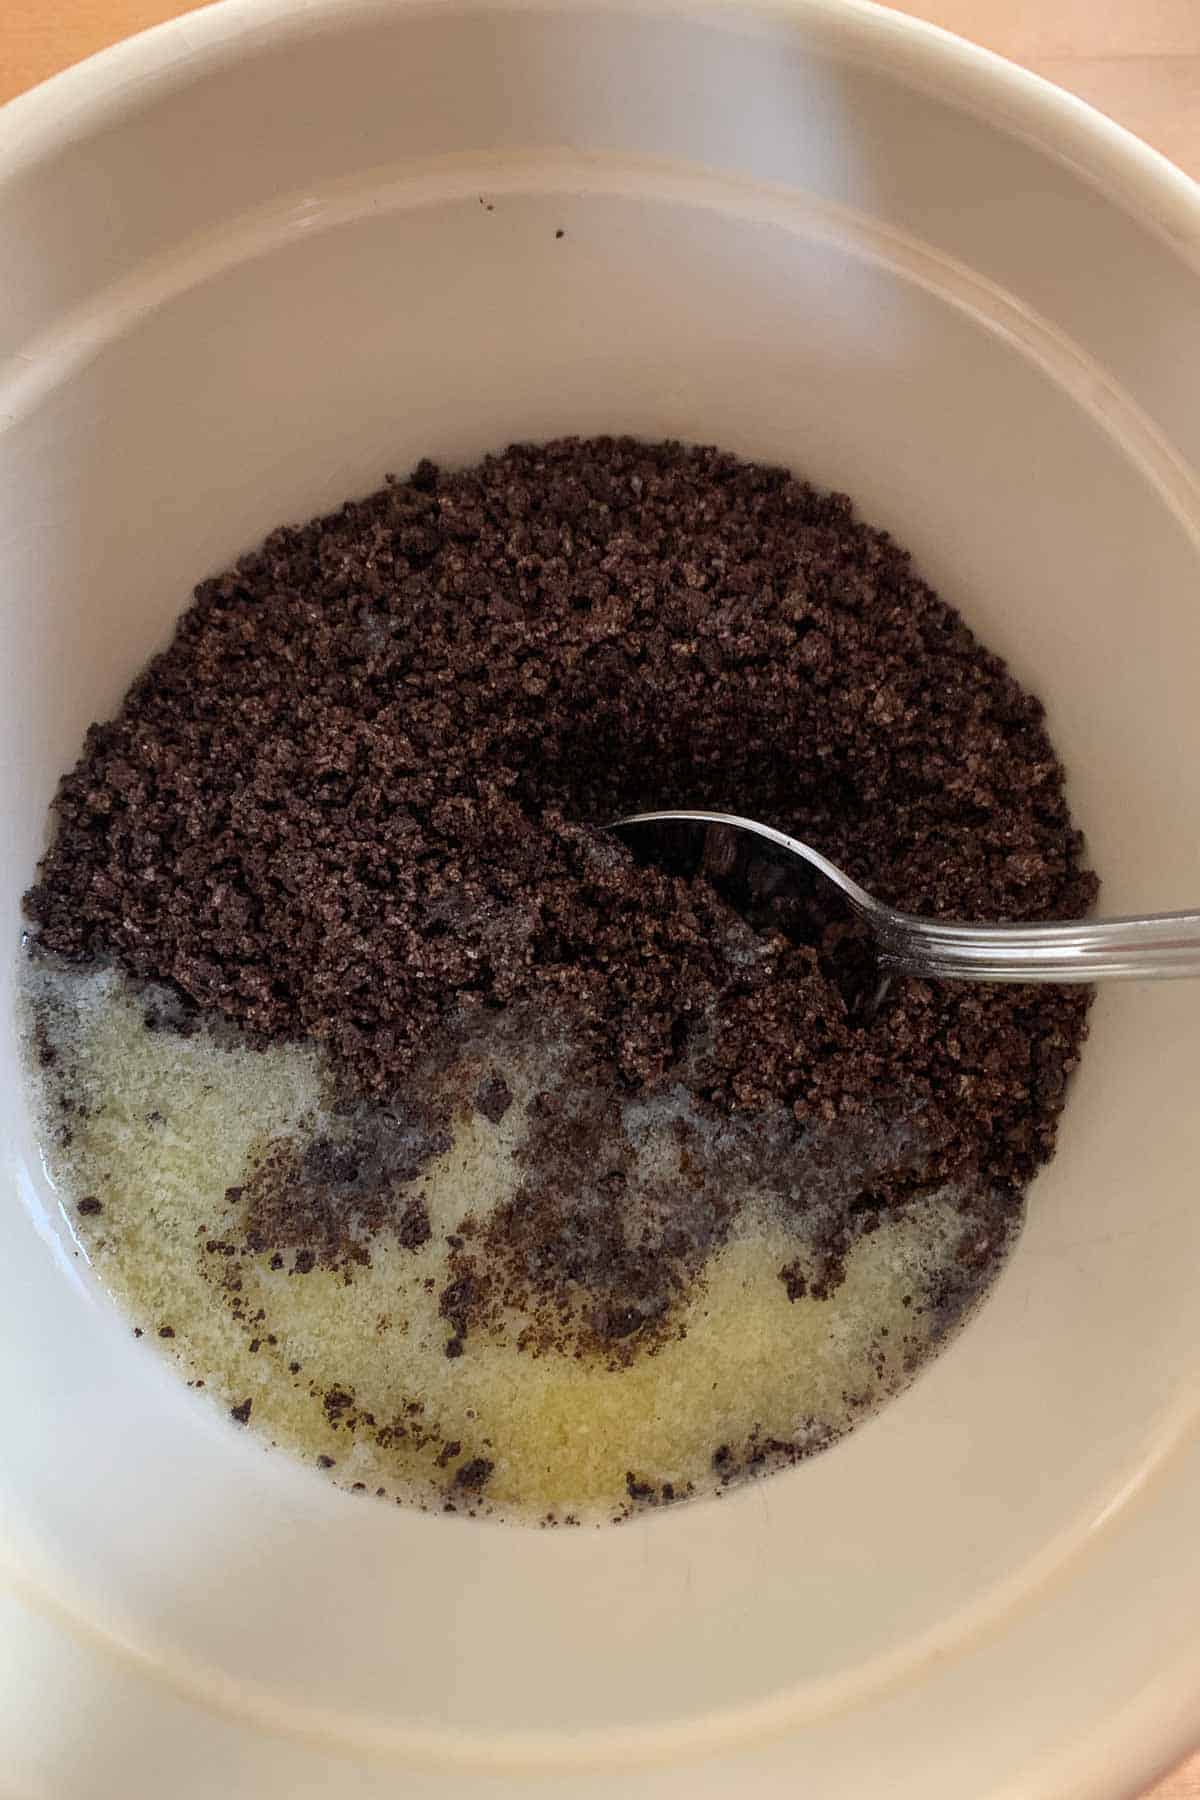 Oreo cookie crumbs being mixed with melted butter in a bowl.